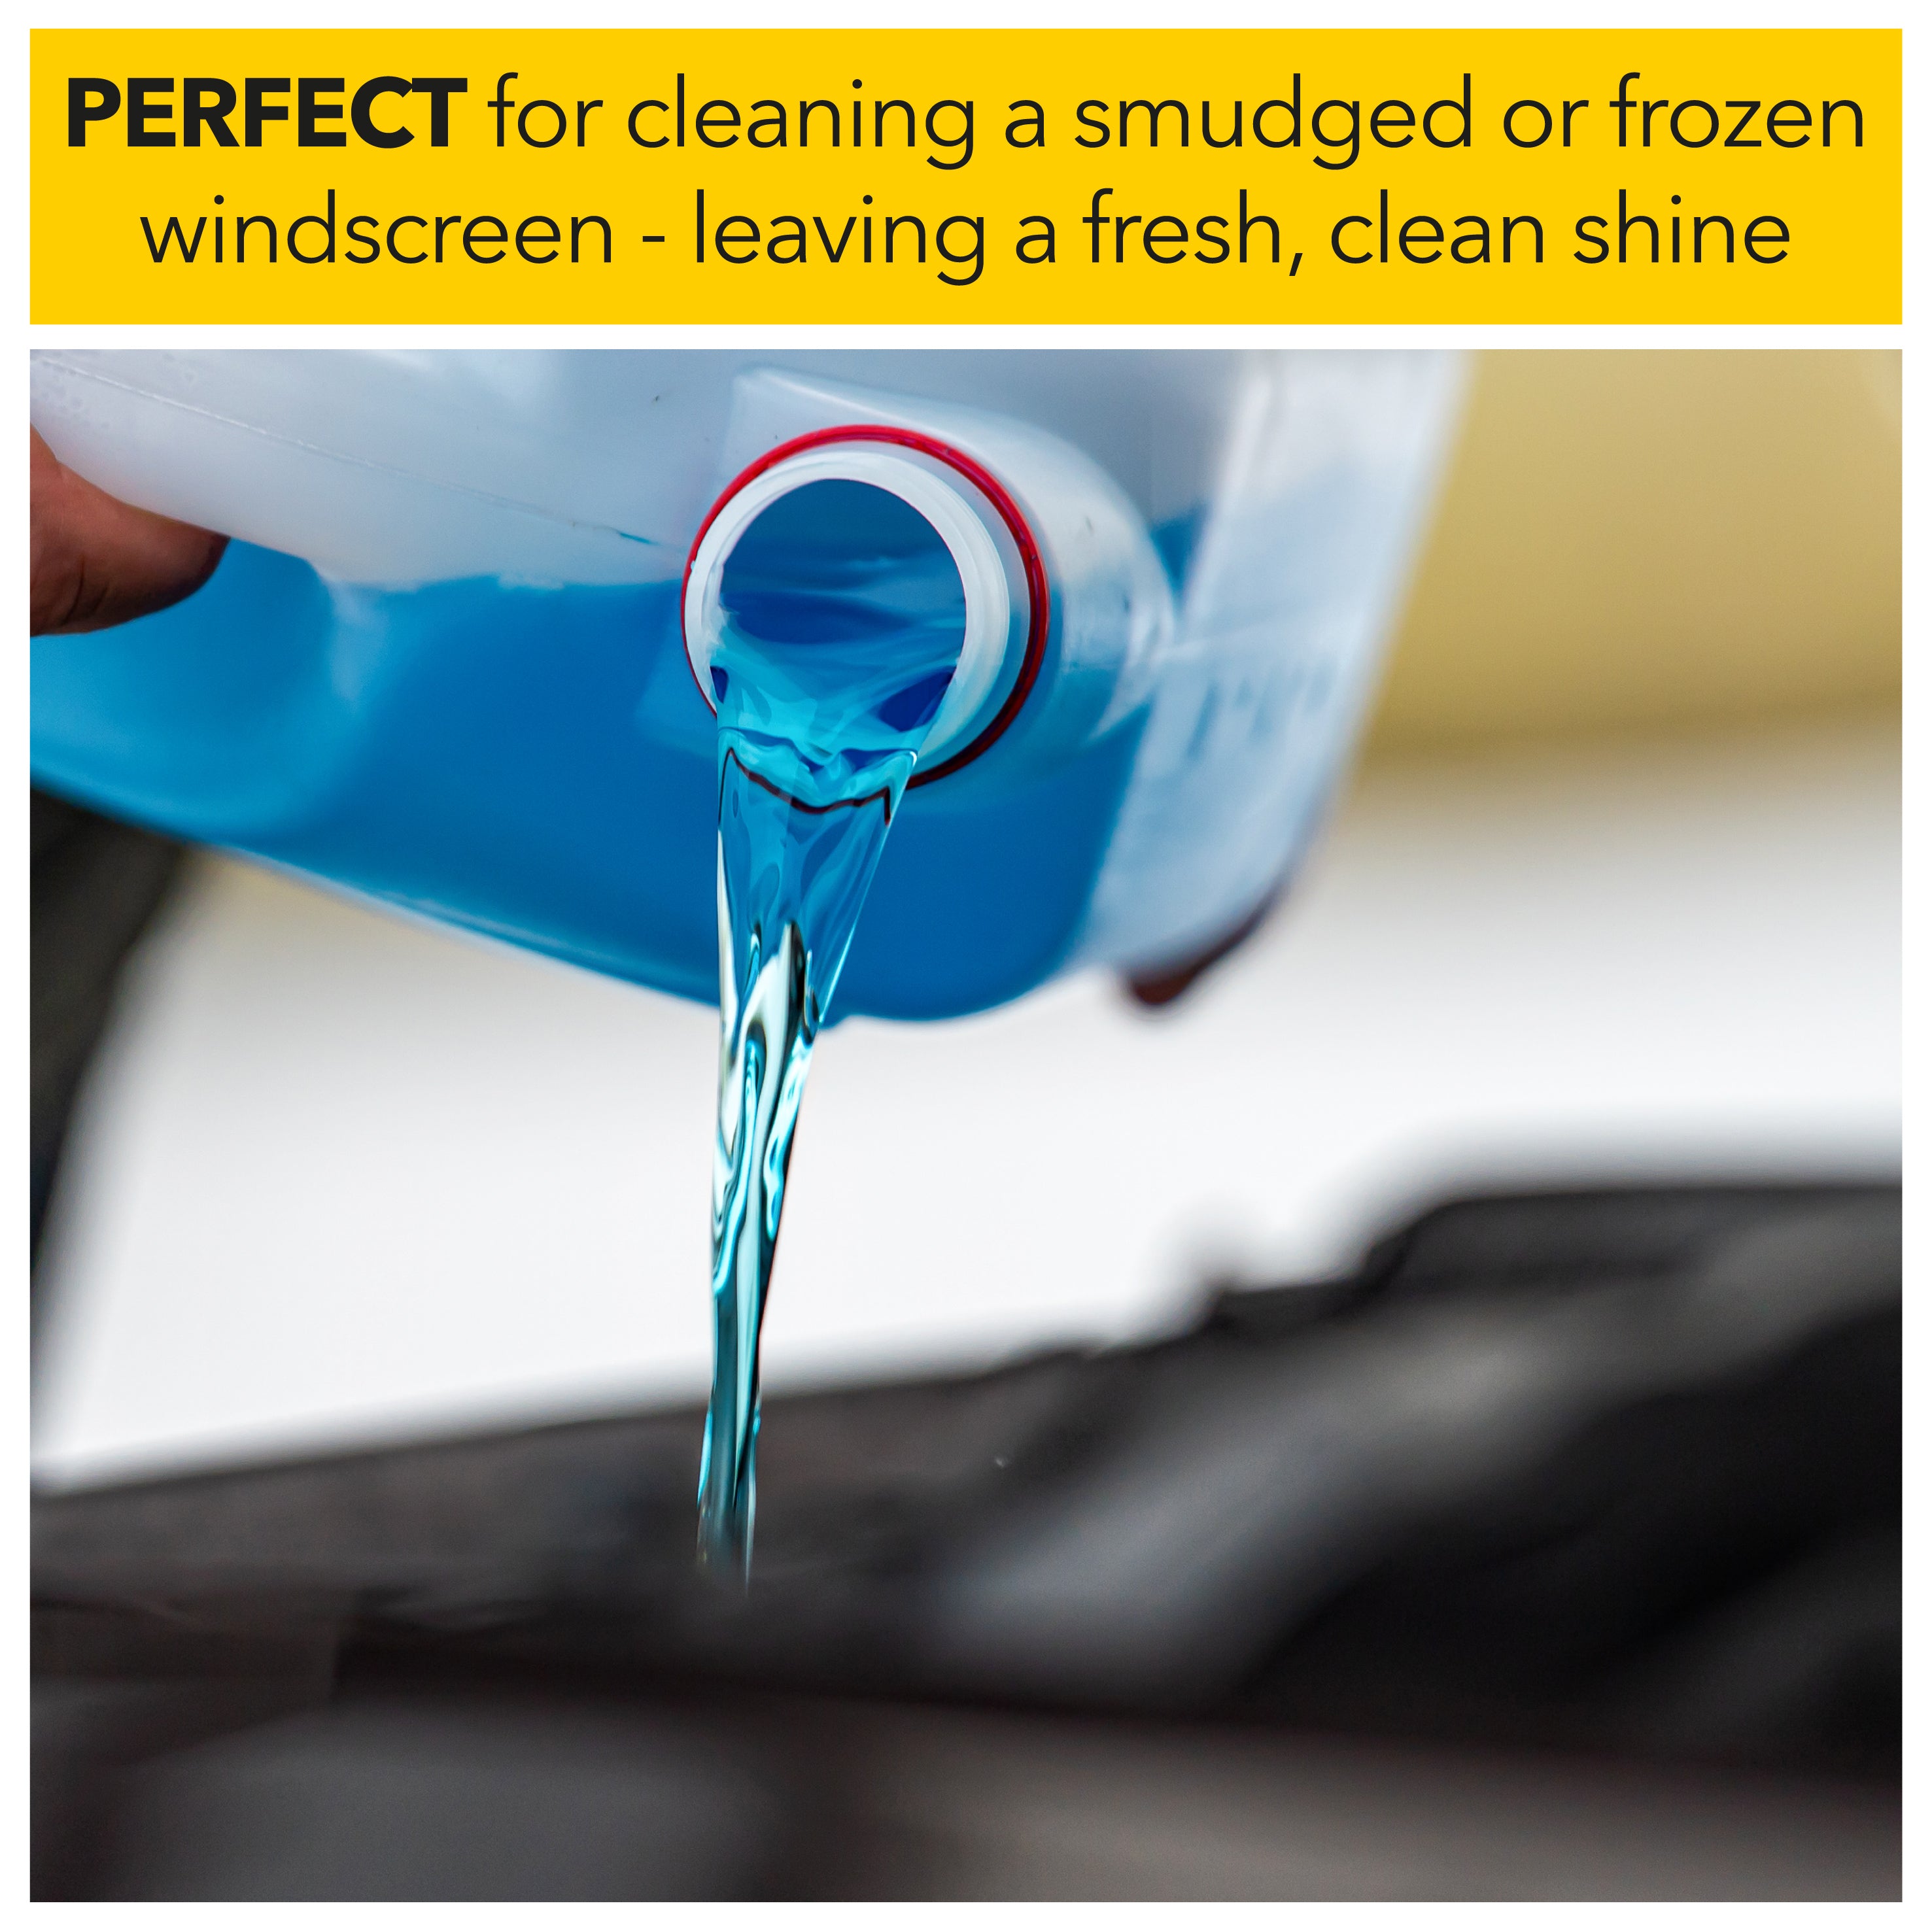 perfect for cleaning a smudged or frozen windscreen - leaving a fresh, clean shine